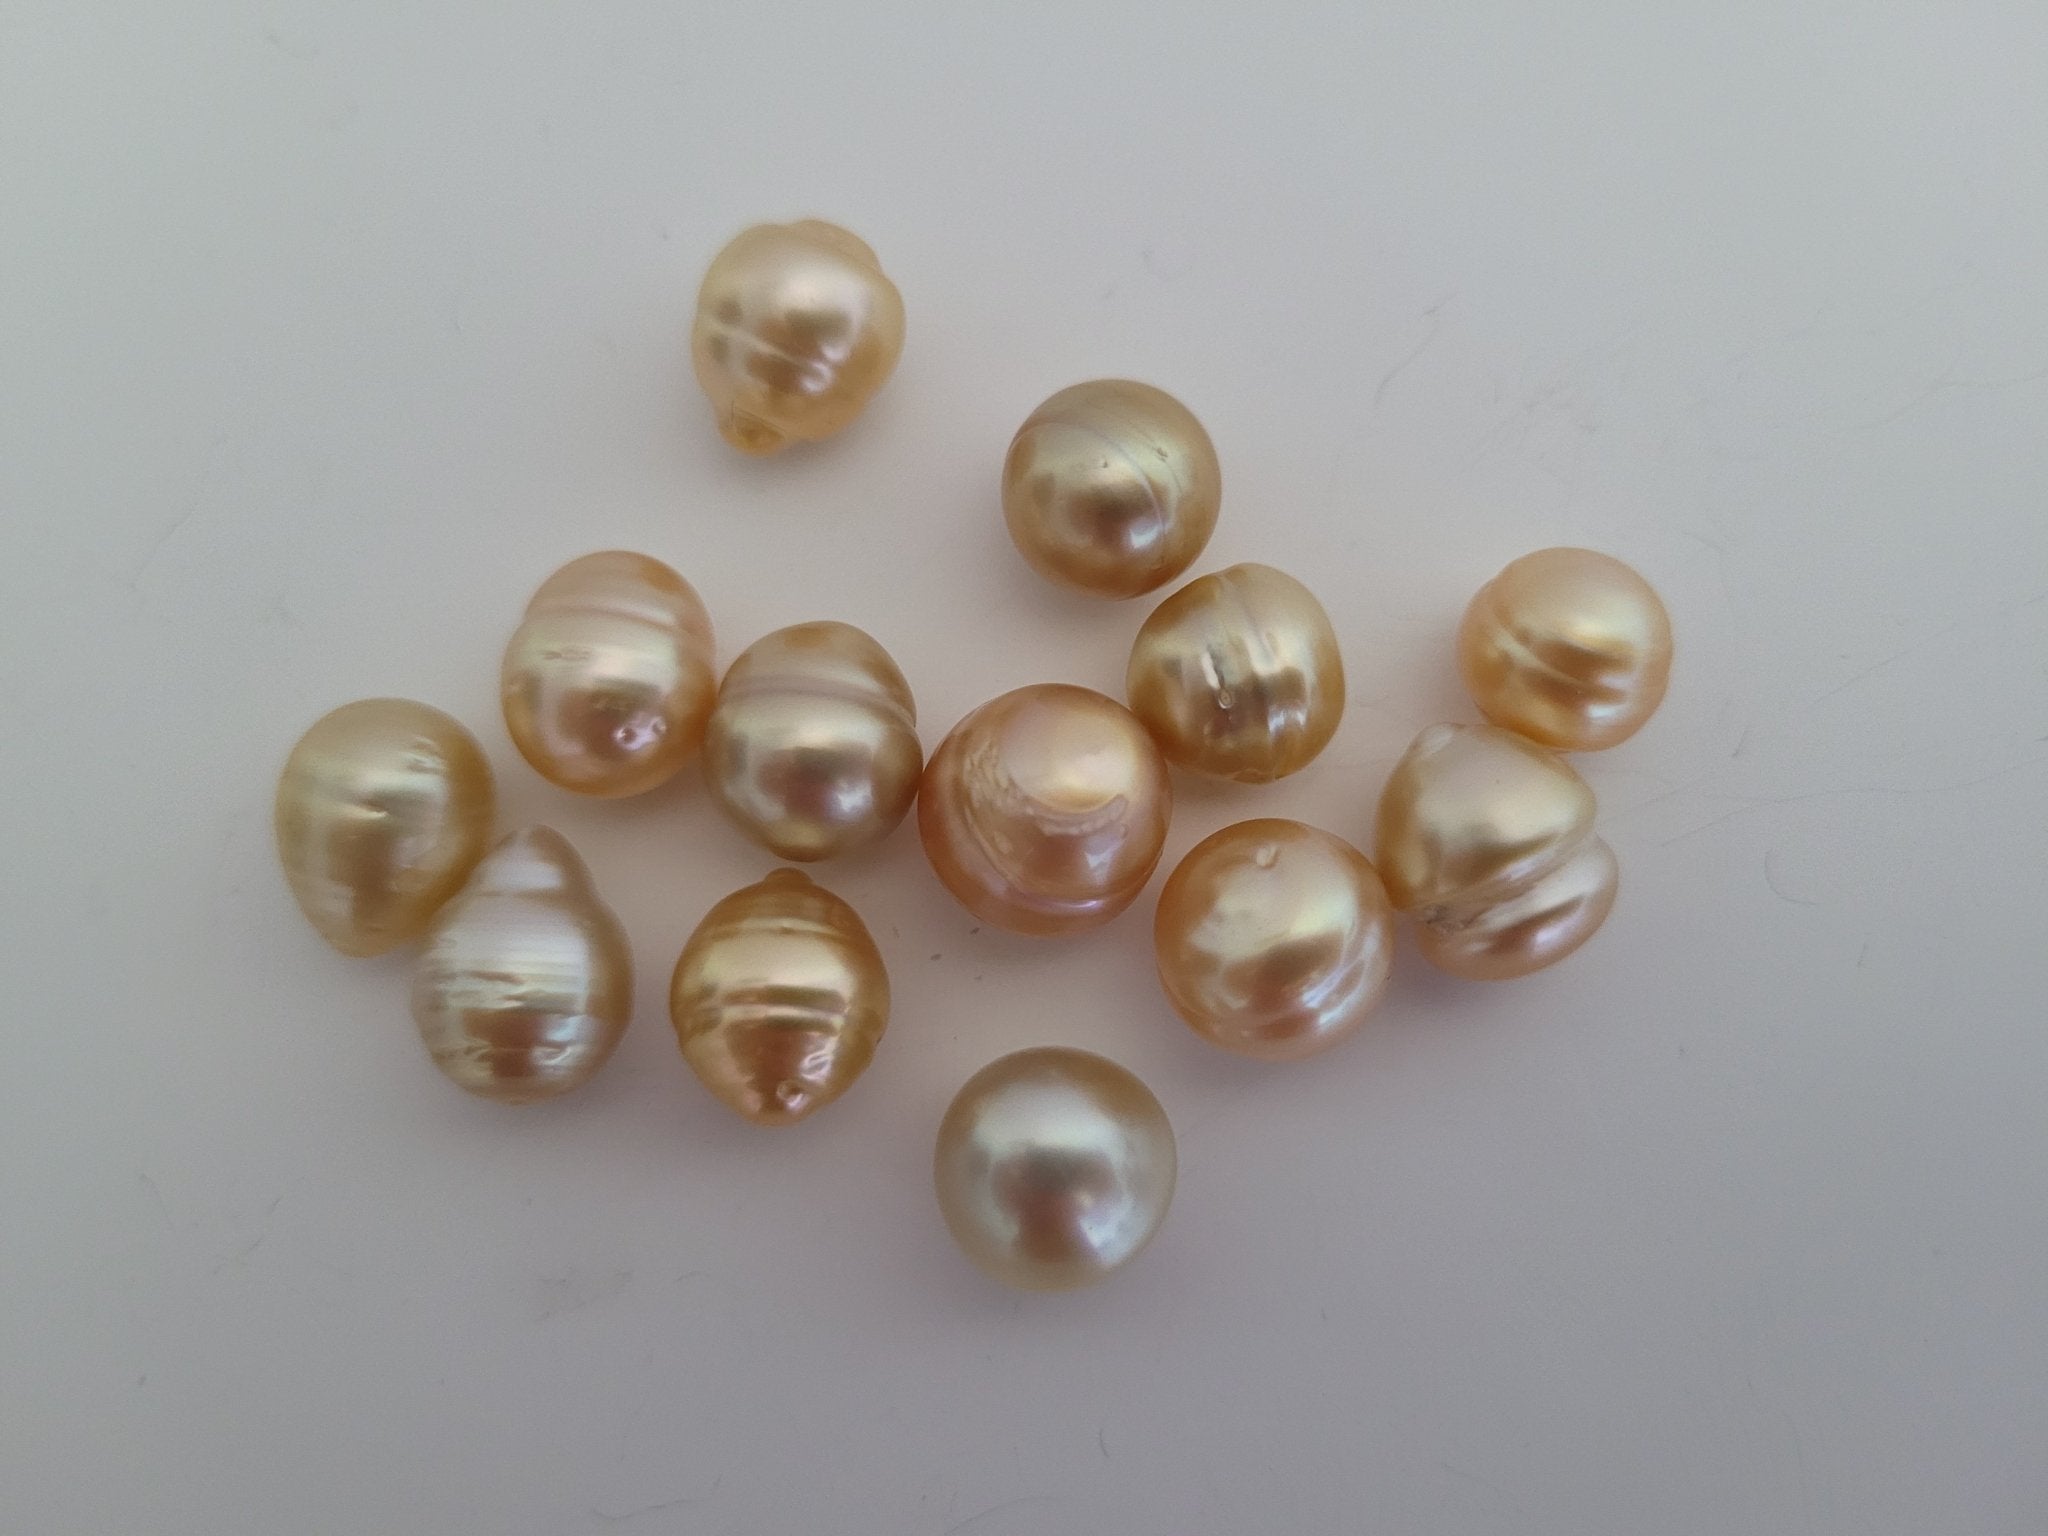 Peach Freshwater Pearl 10.5-11mm Smooth Round AAA Grade Pearl